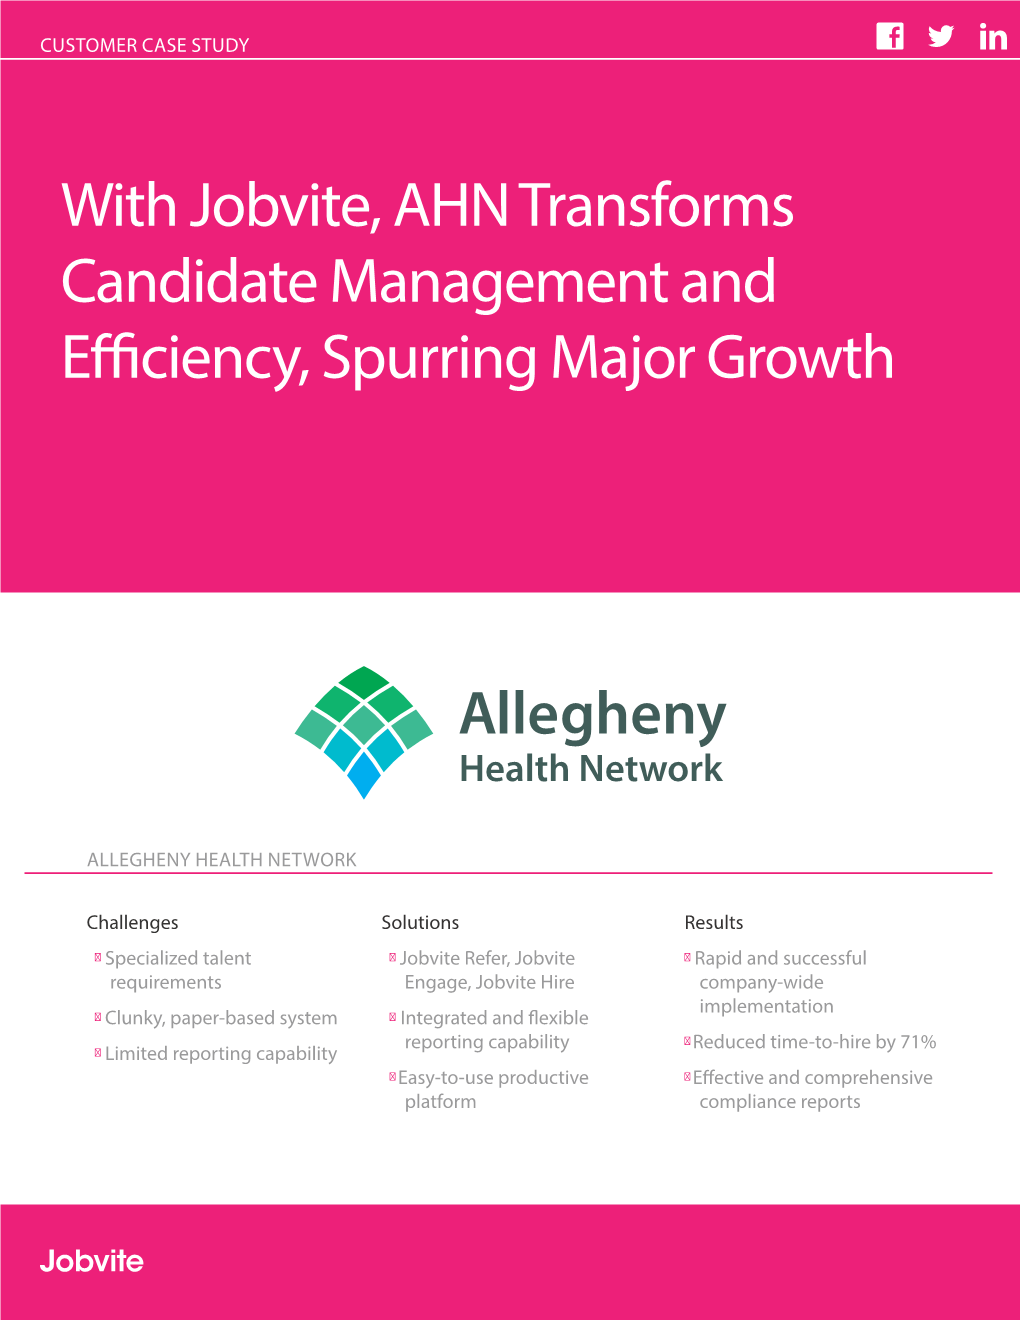 With Jobvite, AHN Transforms Candidate Management and Efficiency, Spurring Major Growth